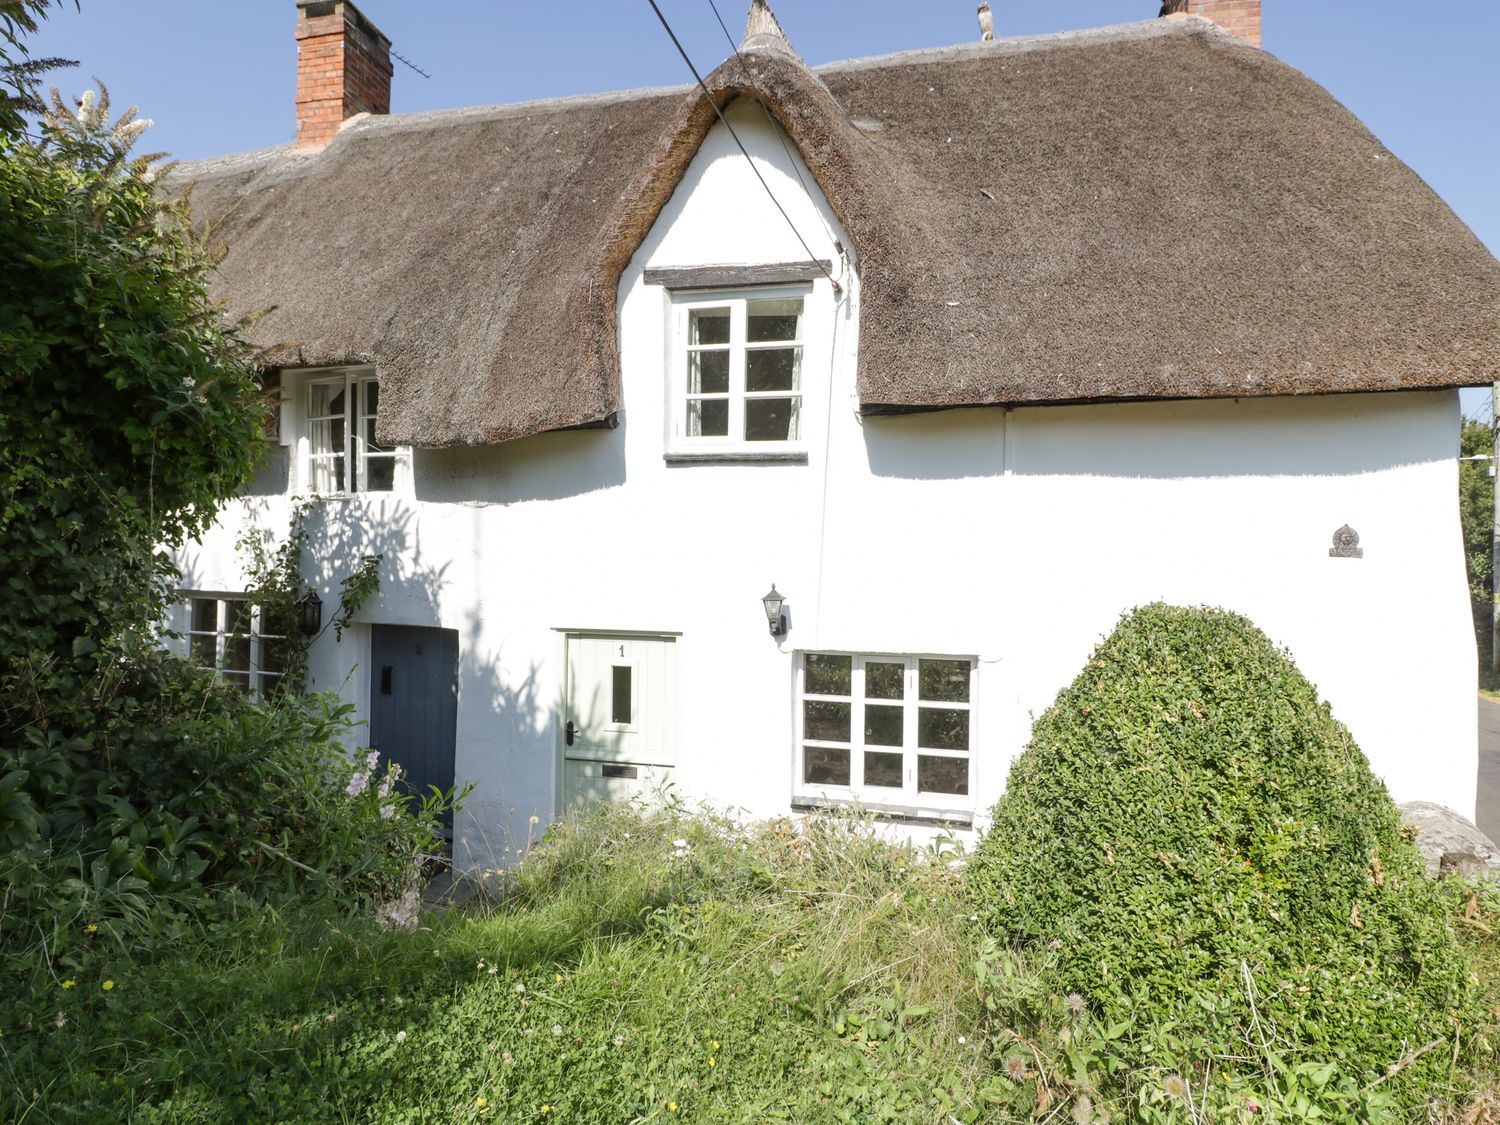 1 Old Thatch - Somerset & Wiltshire - 1070767 - photo 1